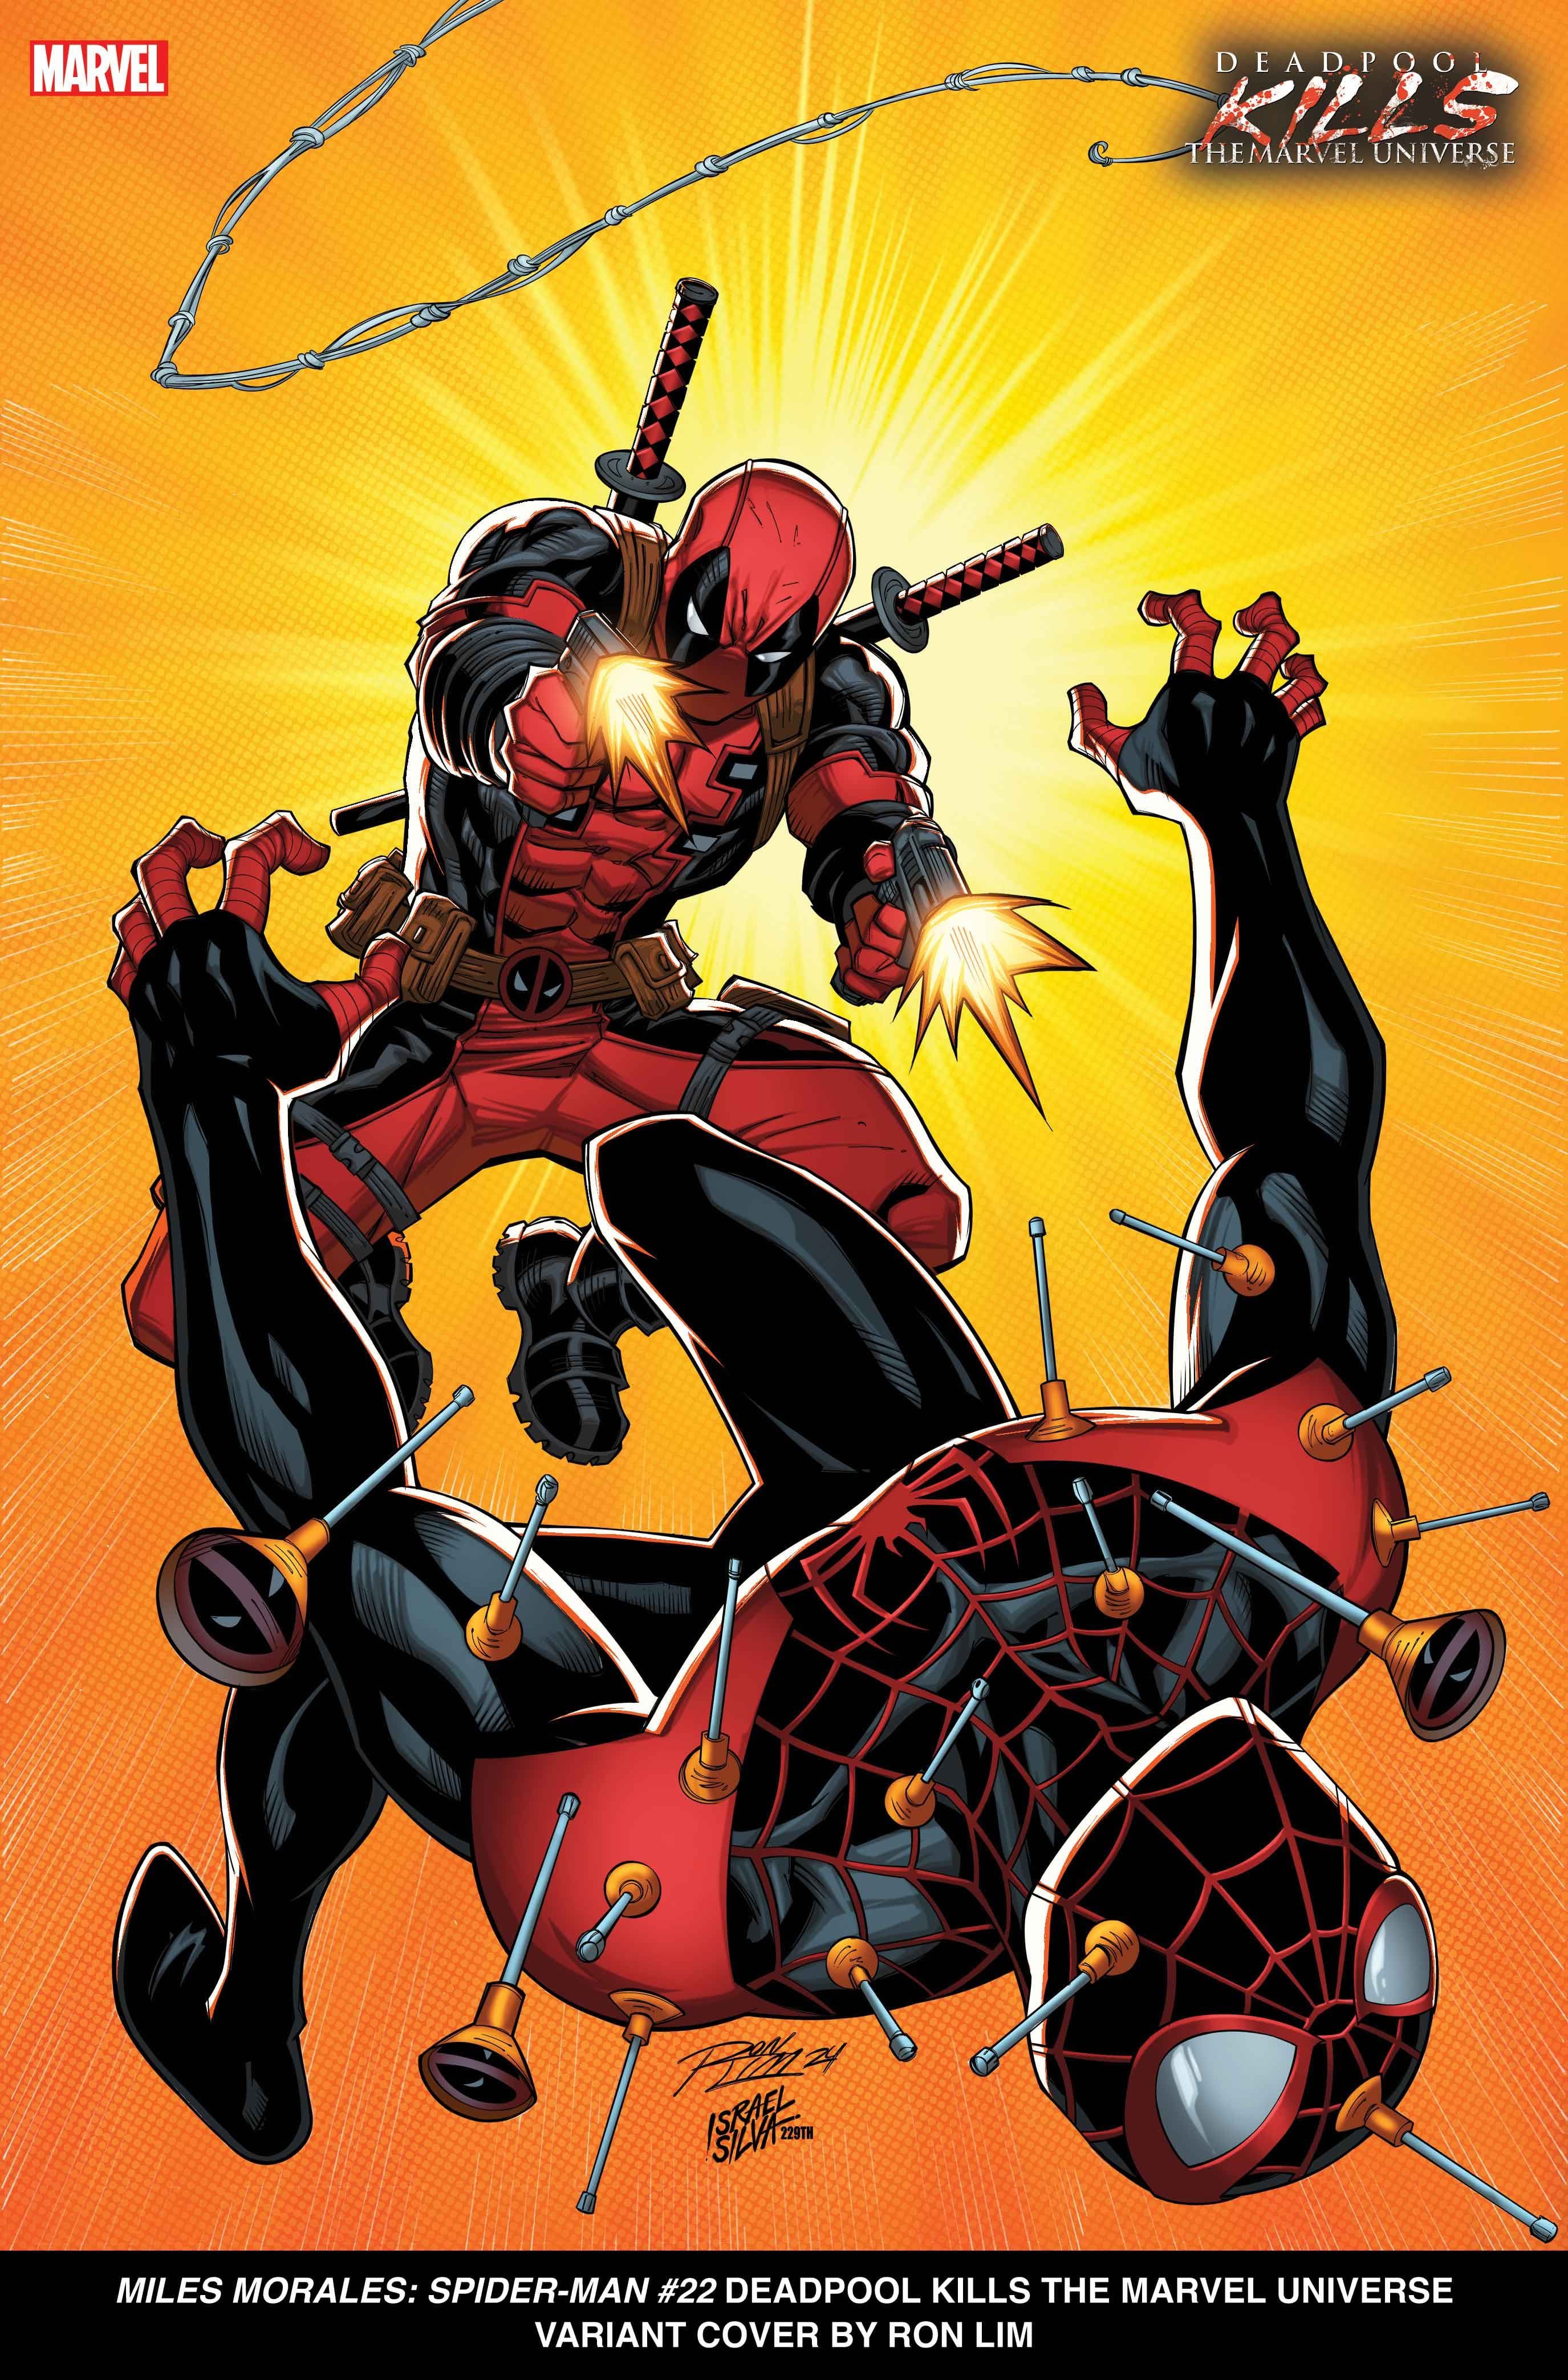 MILES MORALES SPIDER-MAN #22 Deadpool Kills the Marvel Universe Variant Cover by Ron Lim